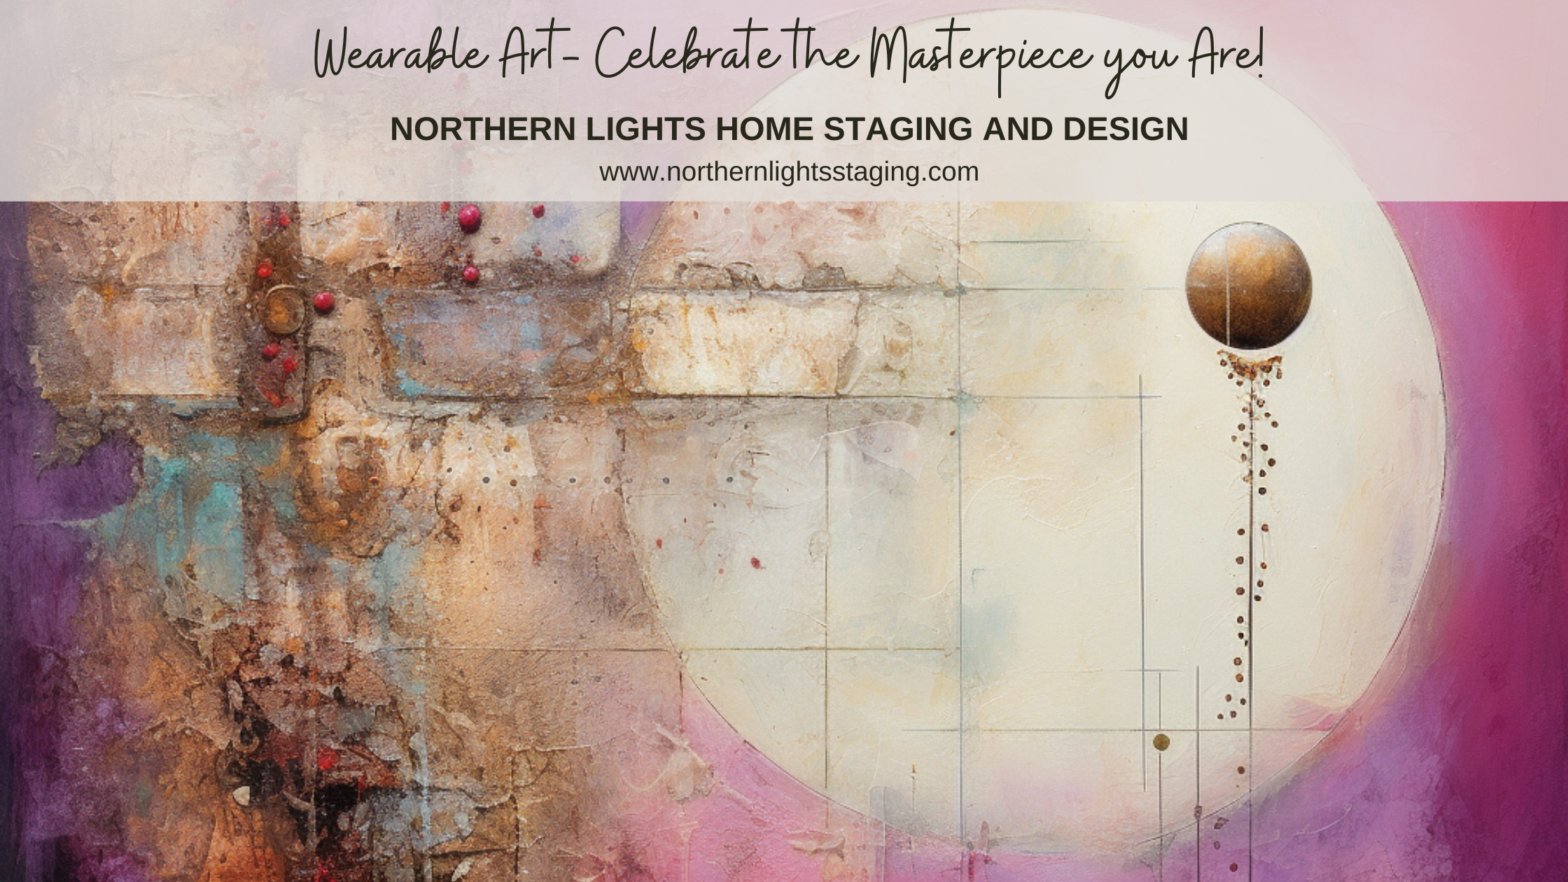 Wearable Art - Celebrate the Masterpiece you Are!